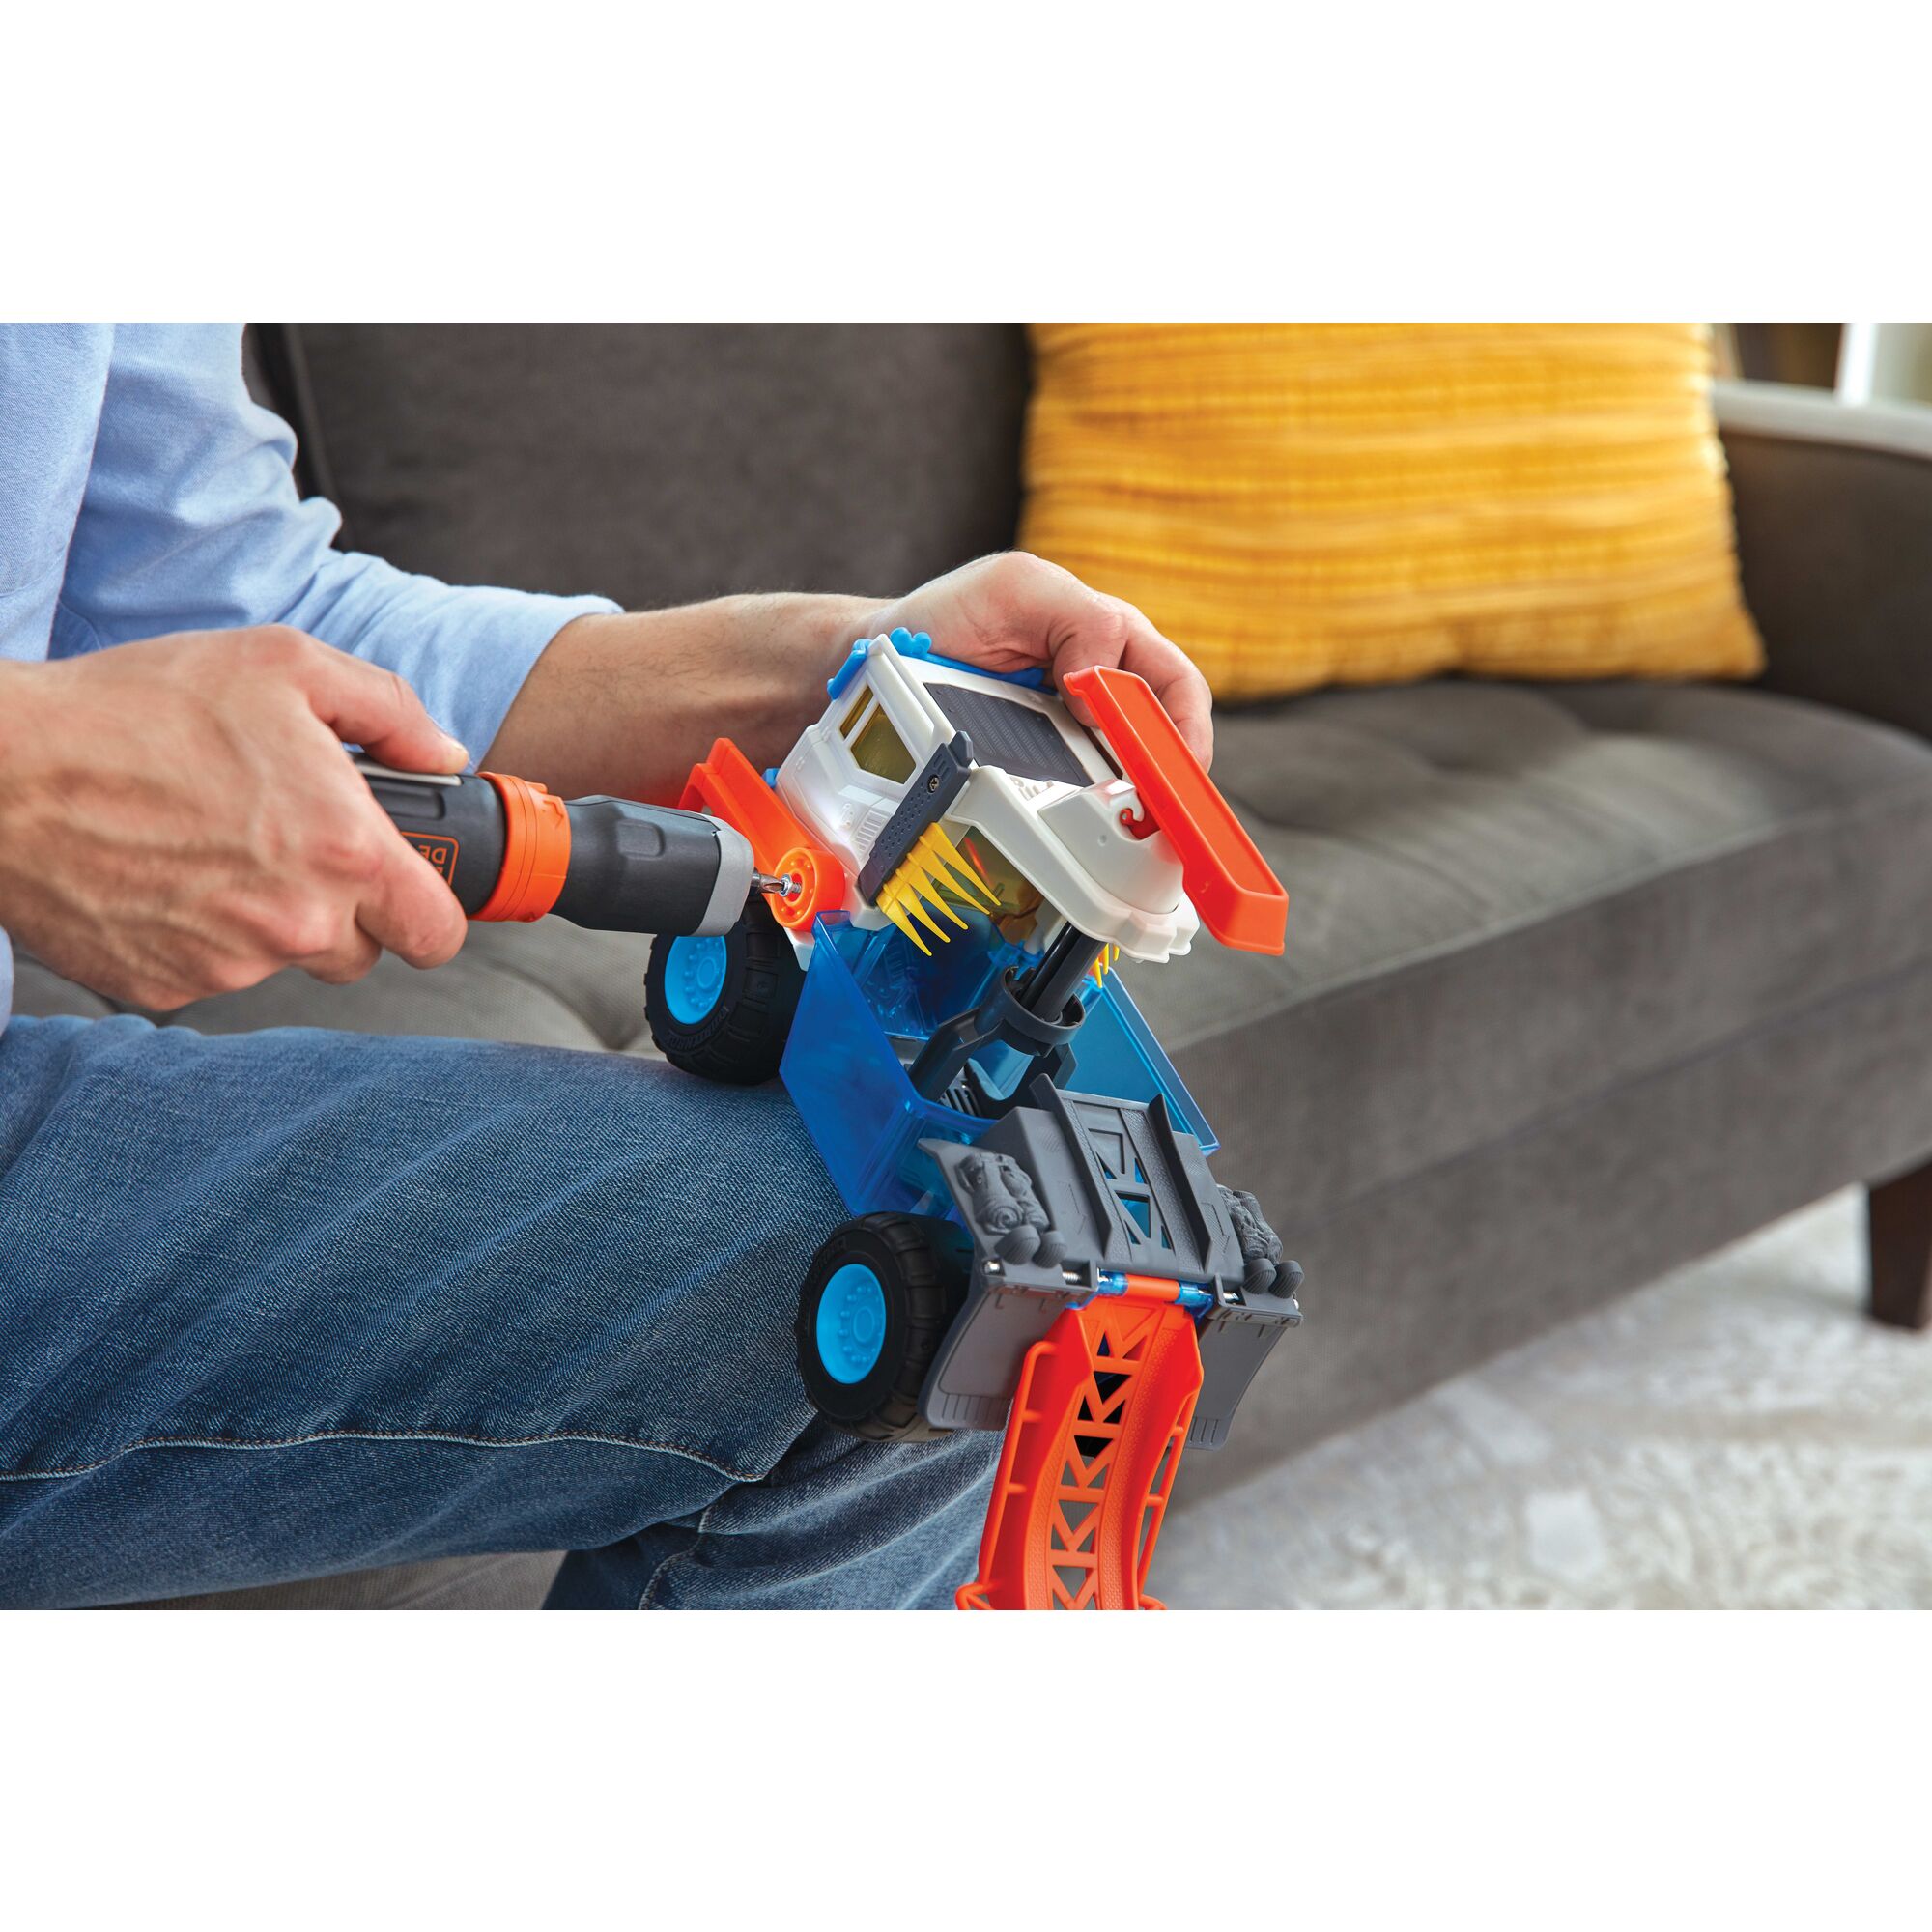 Cordless Power Driver Screwdriver with Extension Shaft being used for fixing toy.